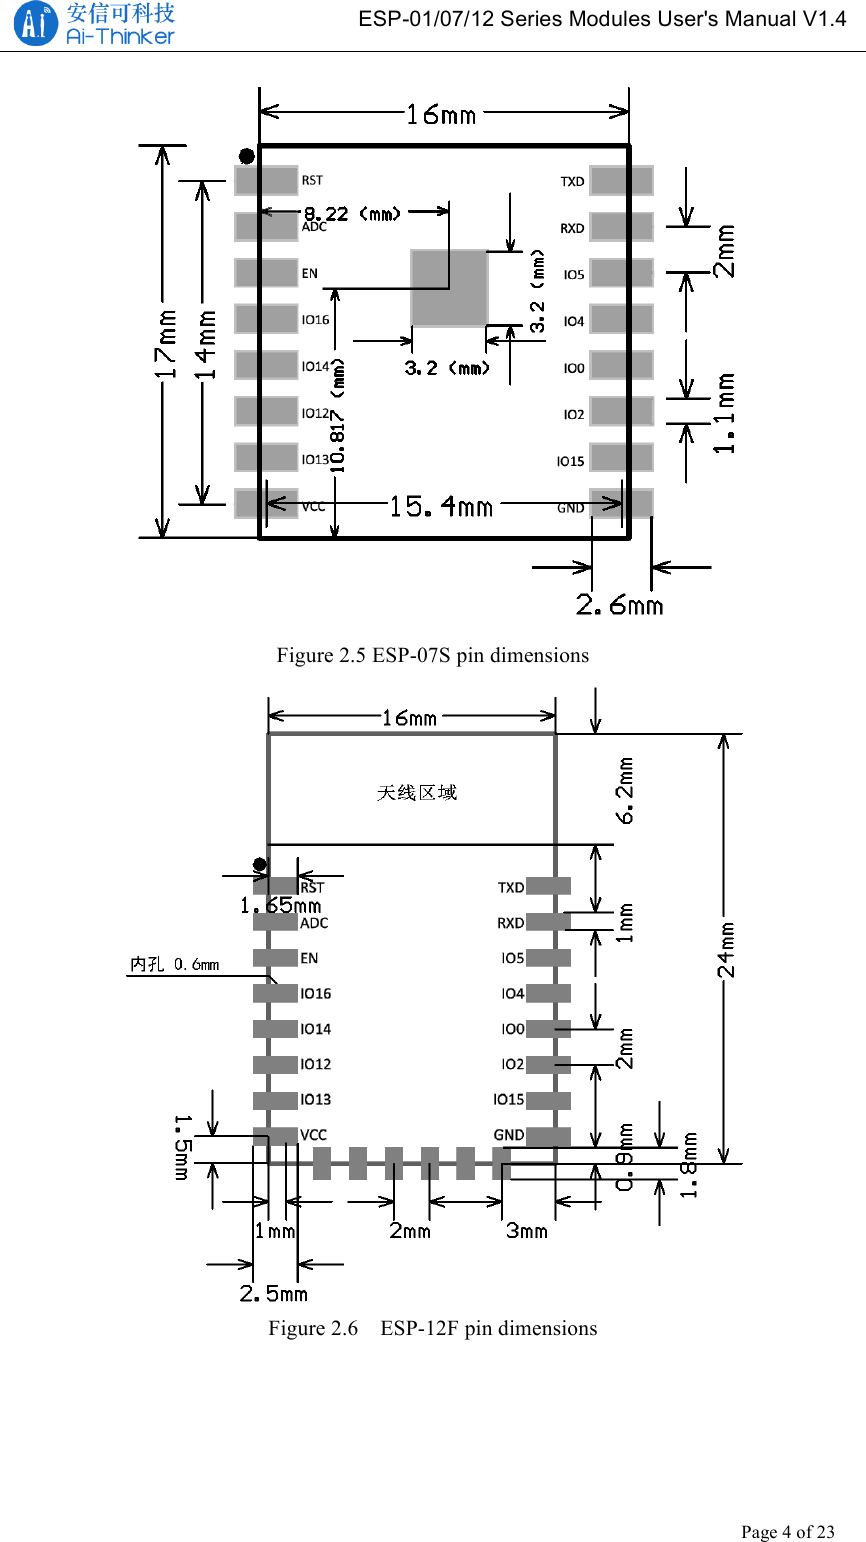   ESP-01/07/12 Series Modules User&apos;s Manual V1.4 Copyright © 2017 Shenzhen Ai-Thinker Technology Co., Ltd All Rights Reserved Page 4 of 23   Figure 2.5 ESP-07S pin dimensions Figure 2.6  ESP-12F pin dimensions 